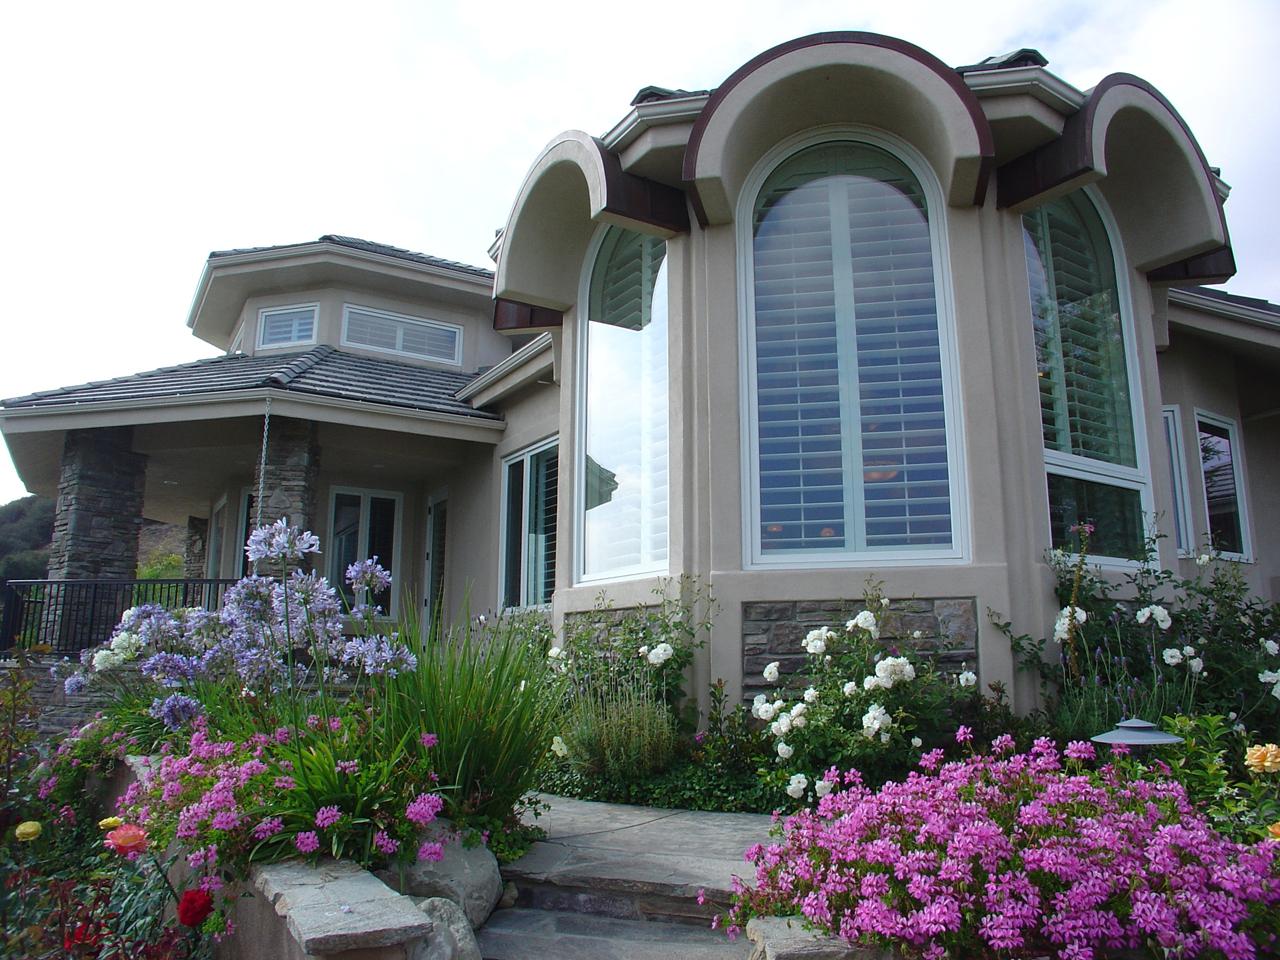 Outside view of mediterranean style home with arched windows with shutters